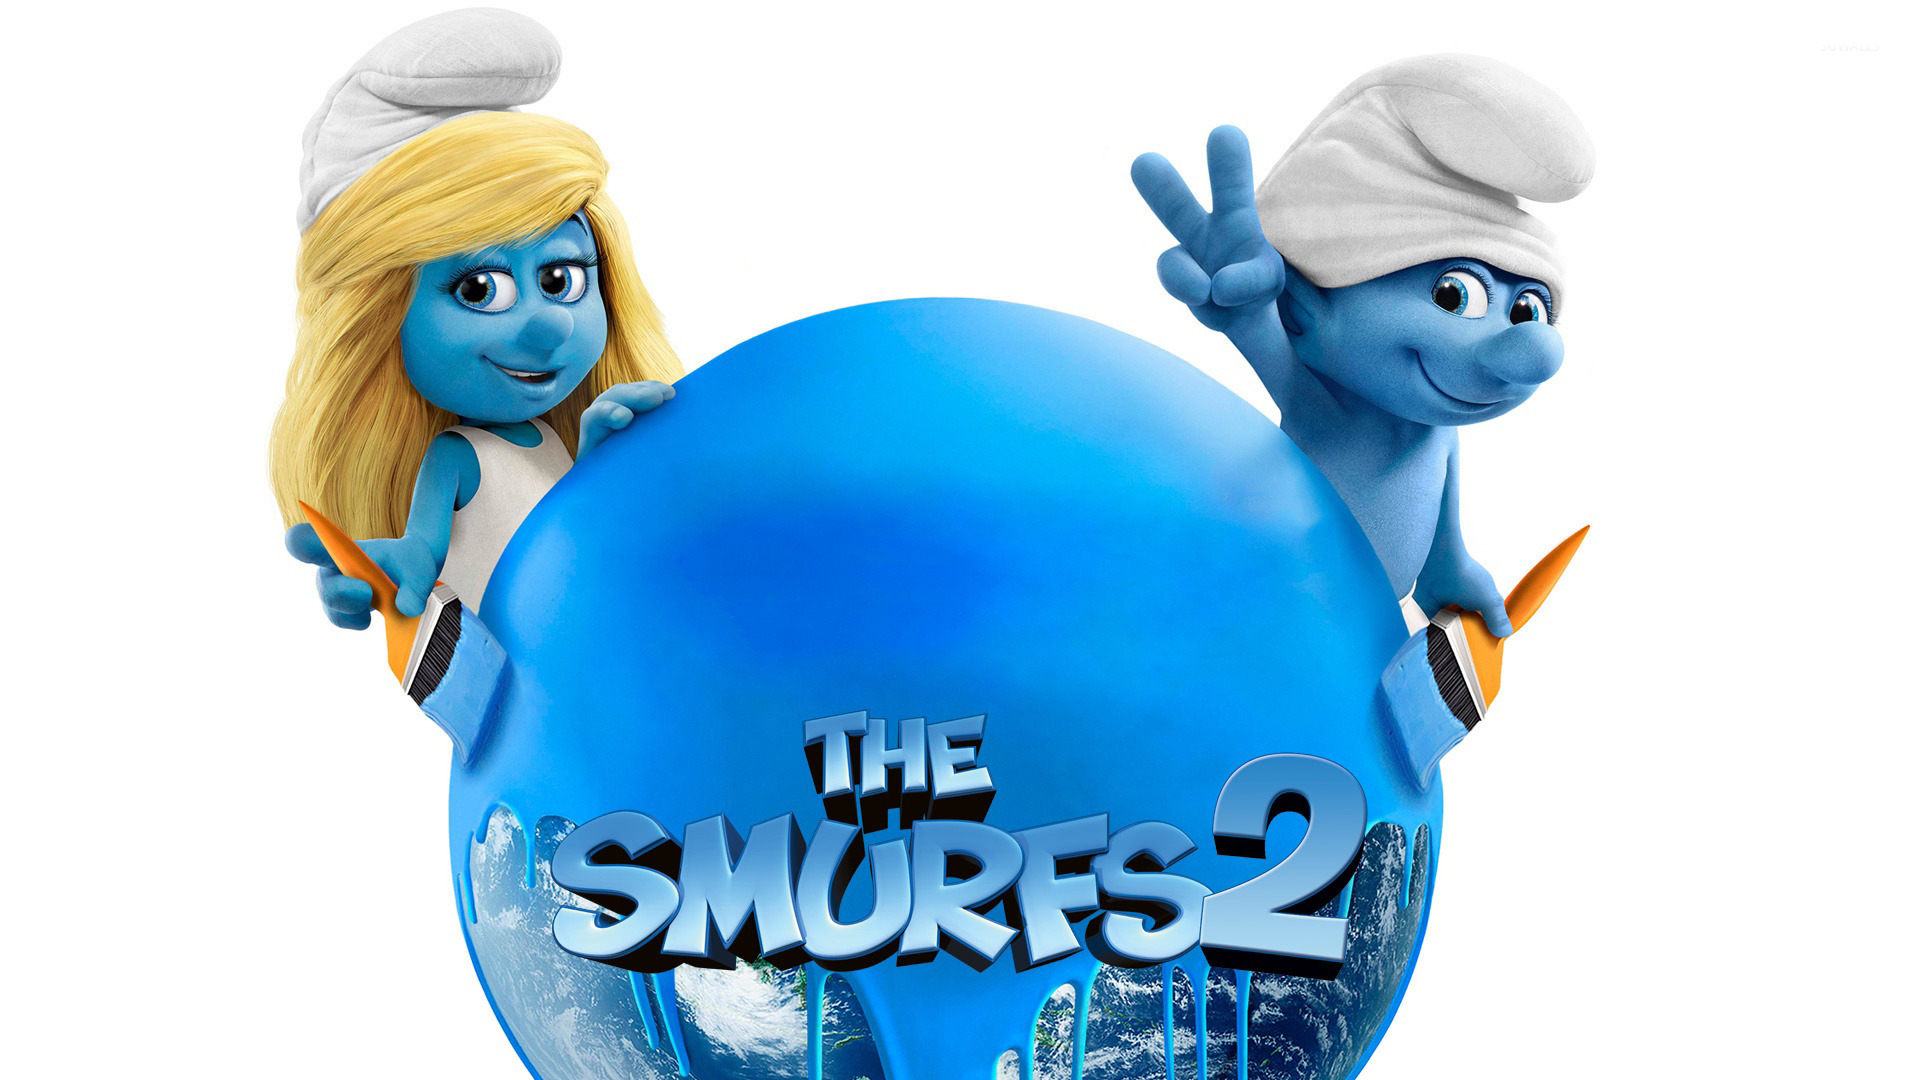 Smurfette and Clumsy - The Smurfs 2 wallpaper - Cartoon wallpapers - #22464